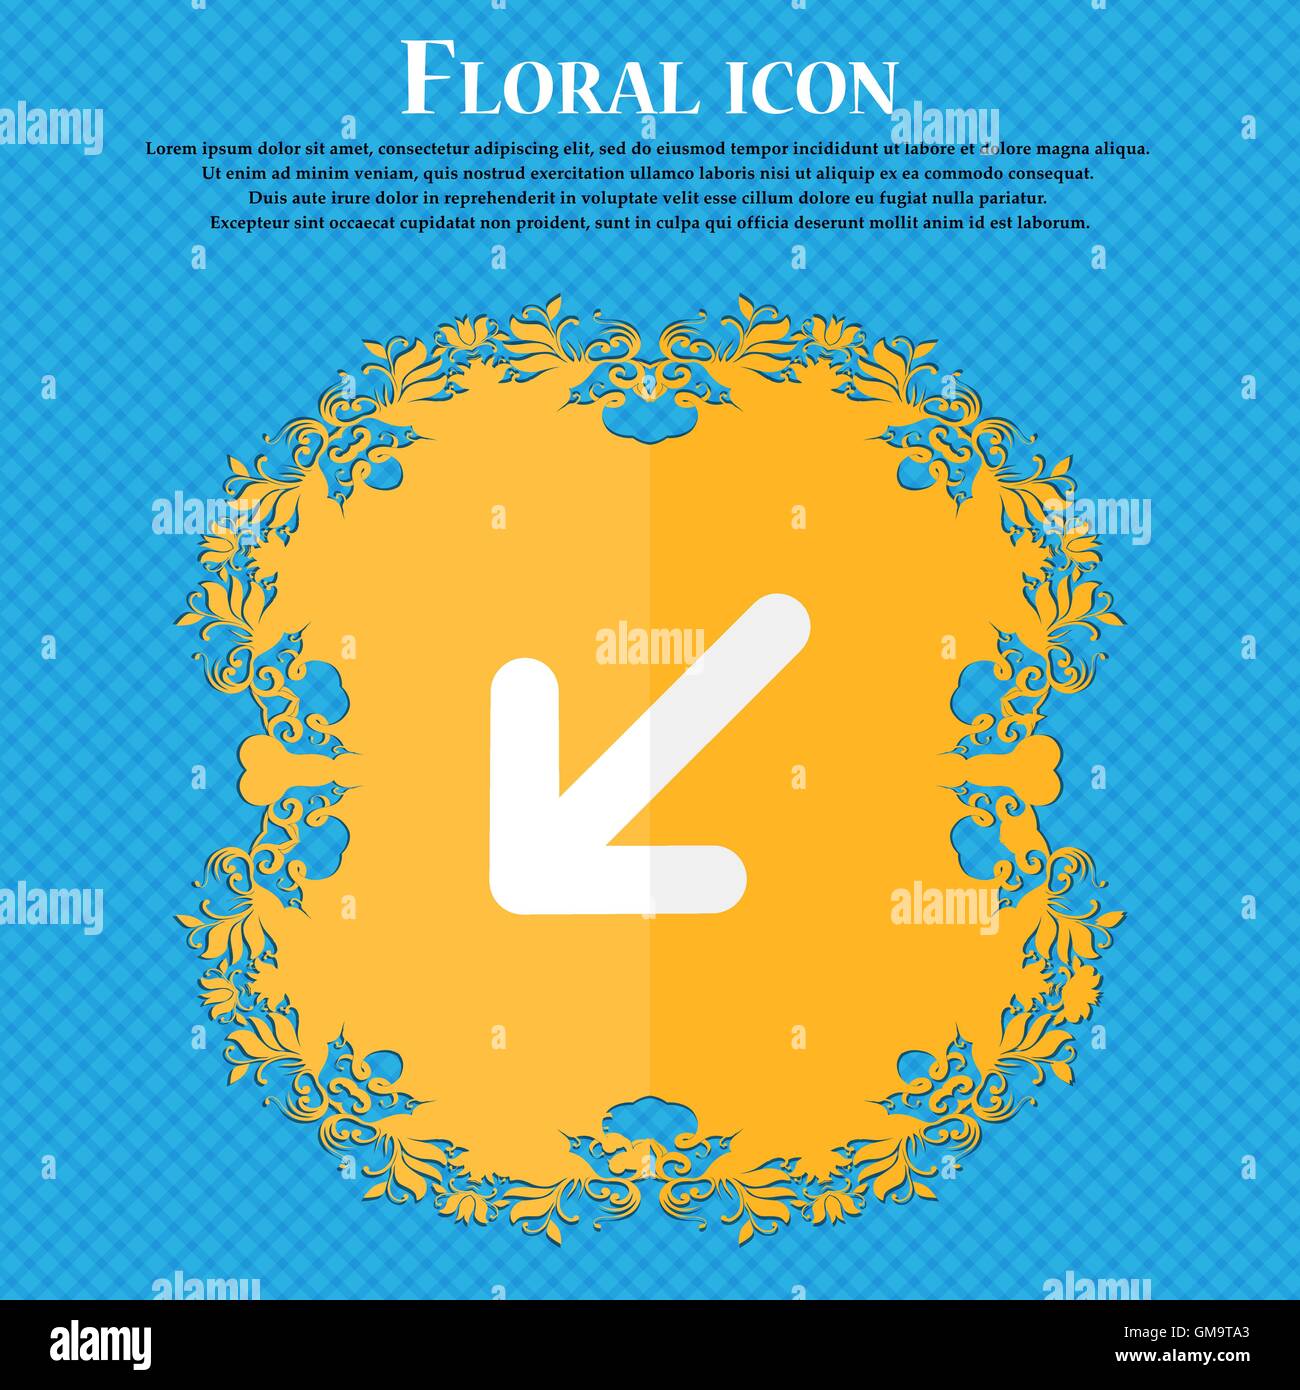 turn to full screen. Floral flat design on a blue abstract background with place for your text. Vector Stock Vector